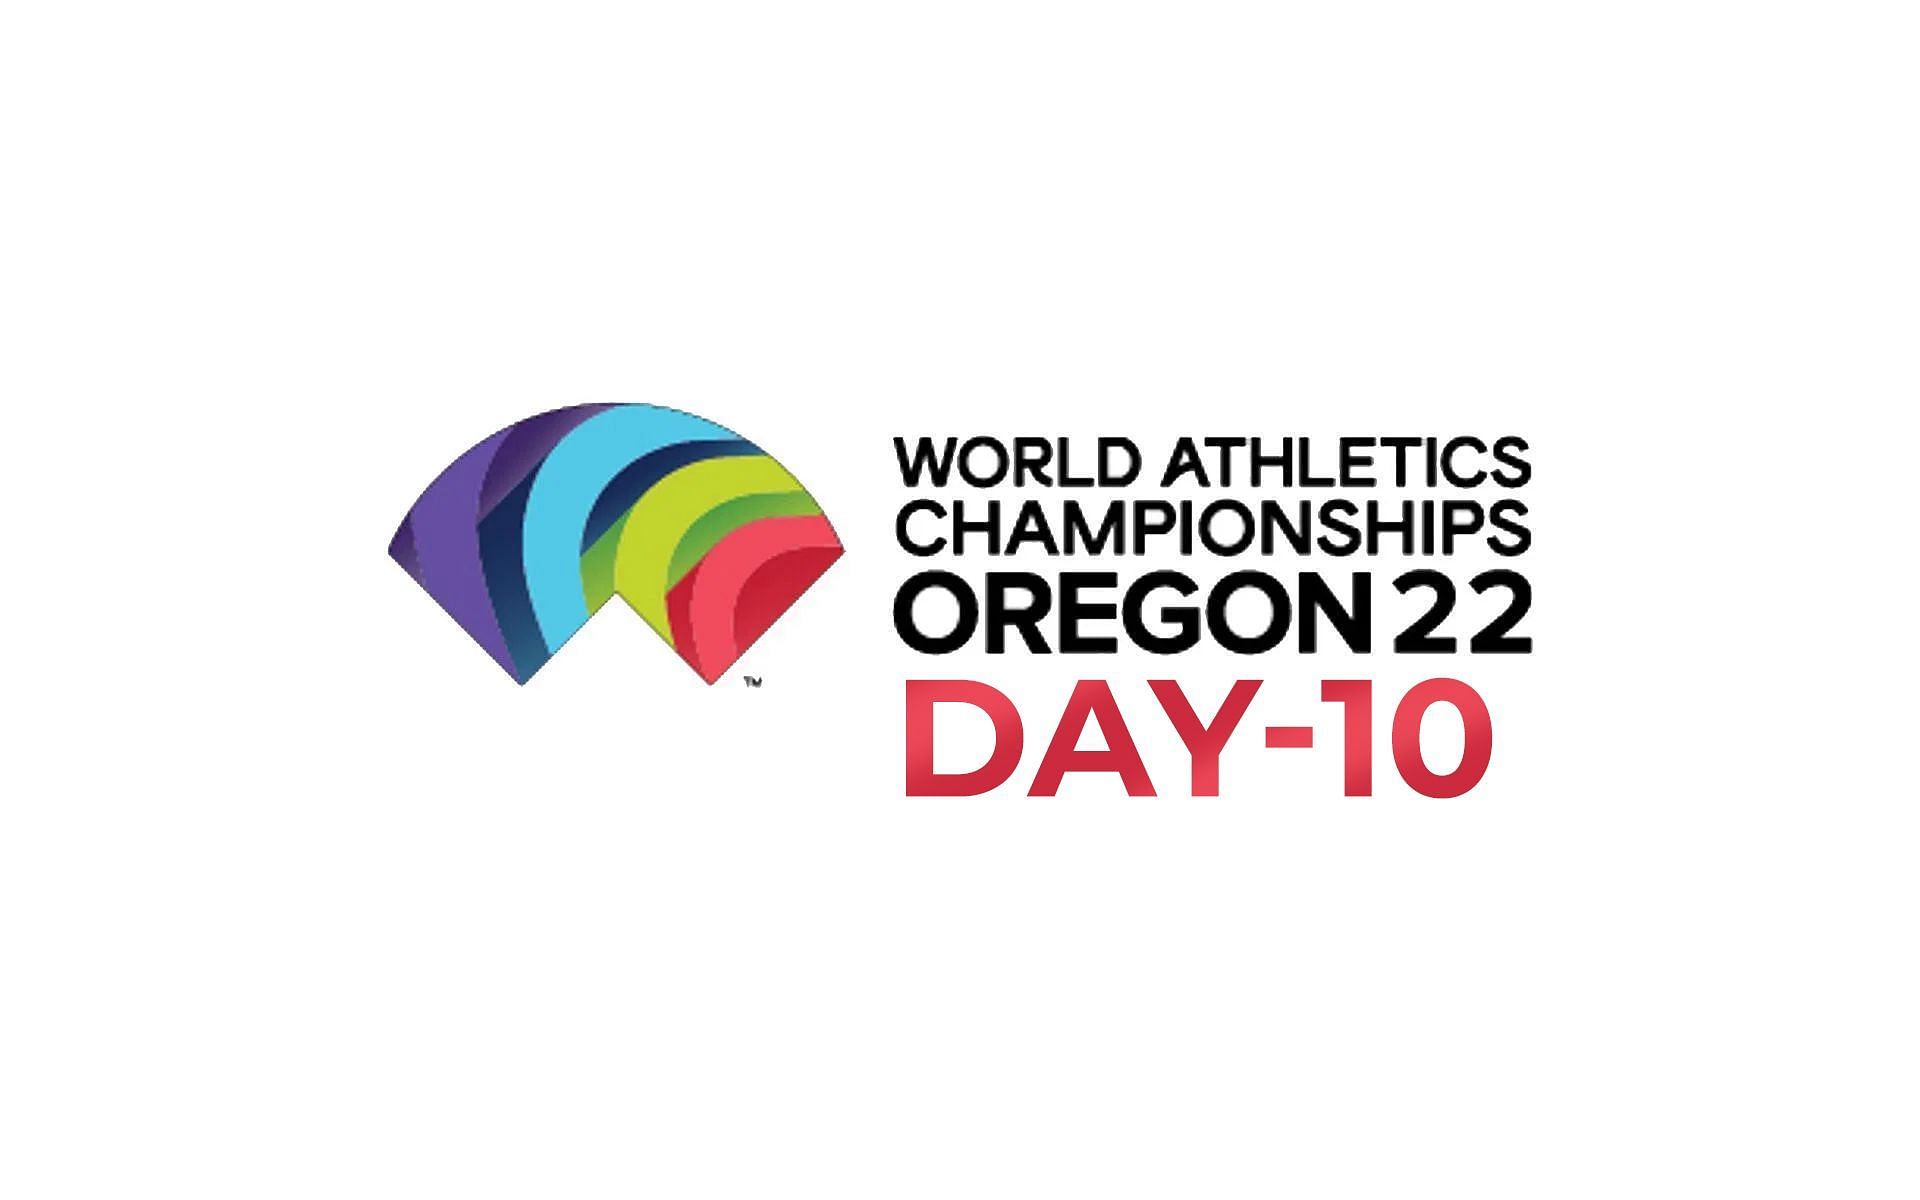 Day 10 of the World Athletics Championship 2022 is set to take place on July 24, 2022 (Image via Sportskeeda)